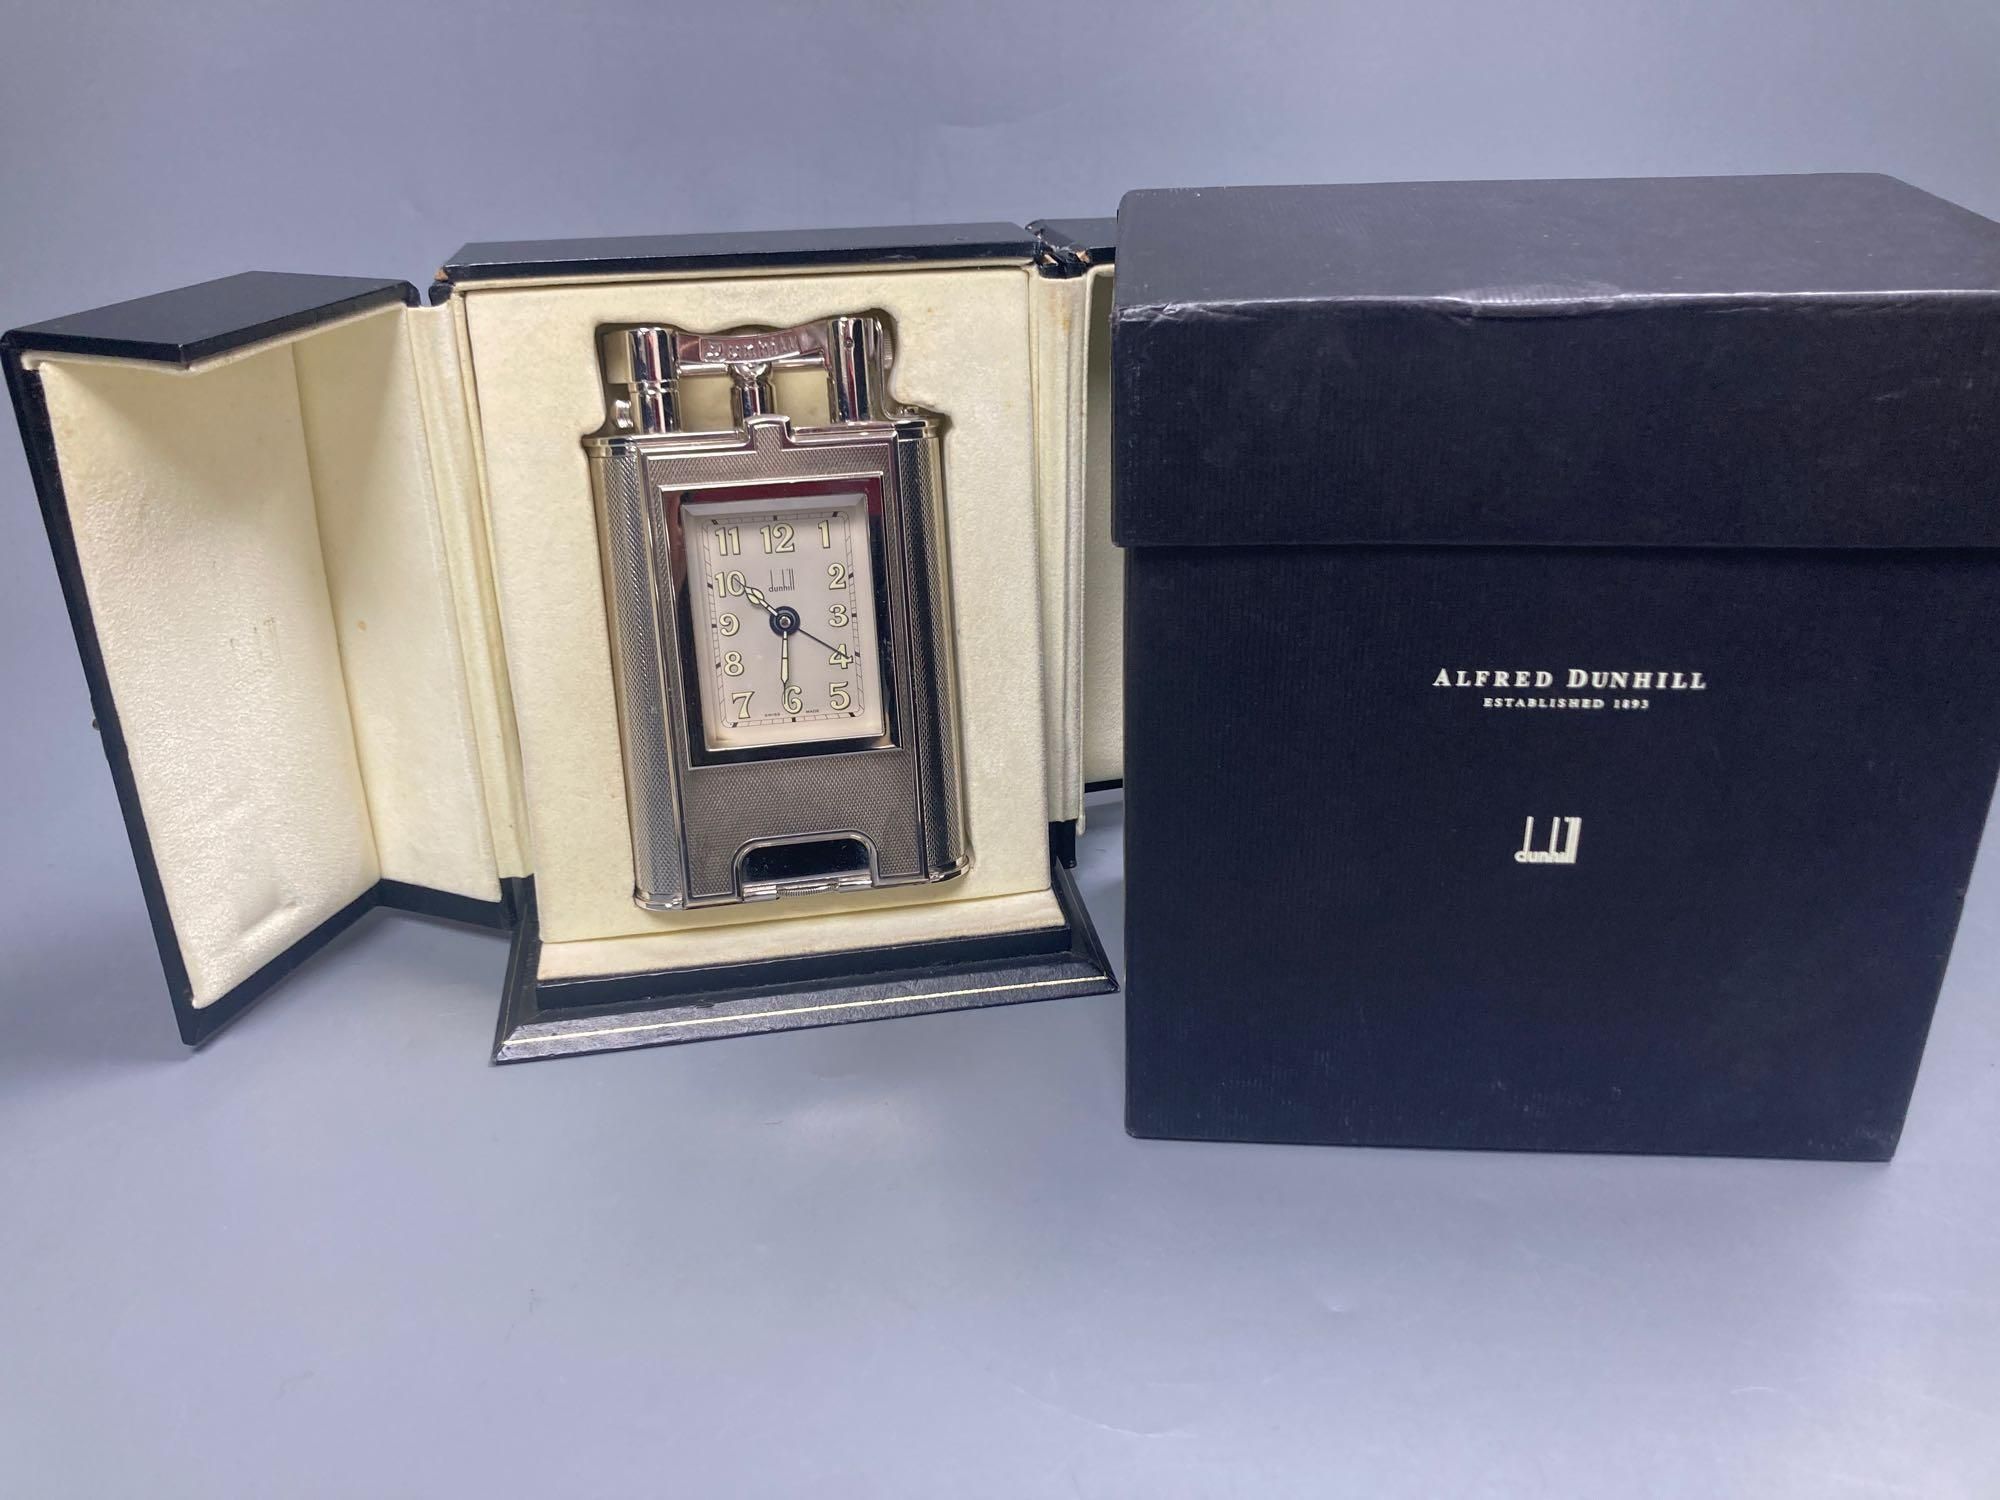 A Dunhill table lighter - Charlston, with timepiece